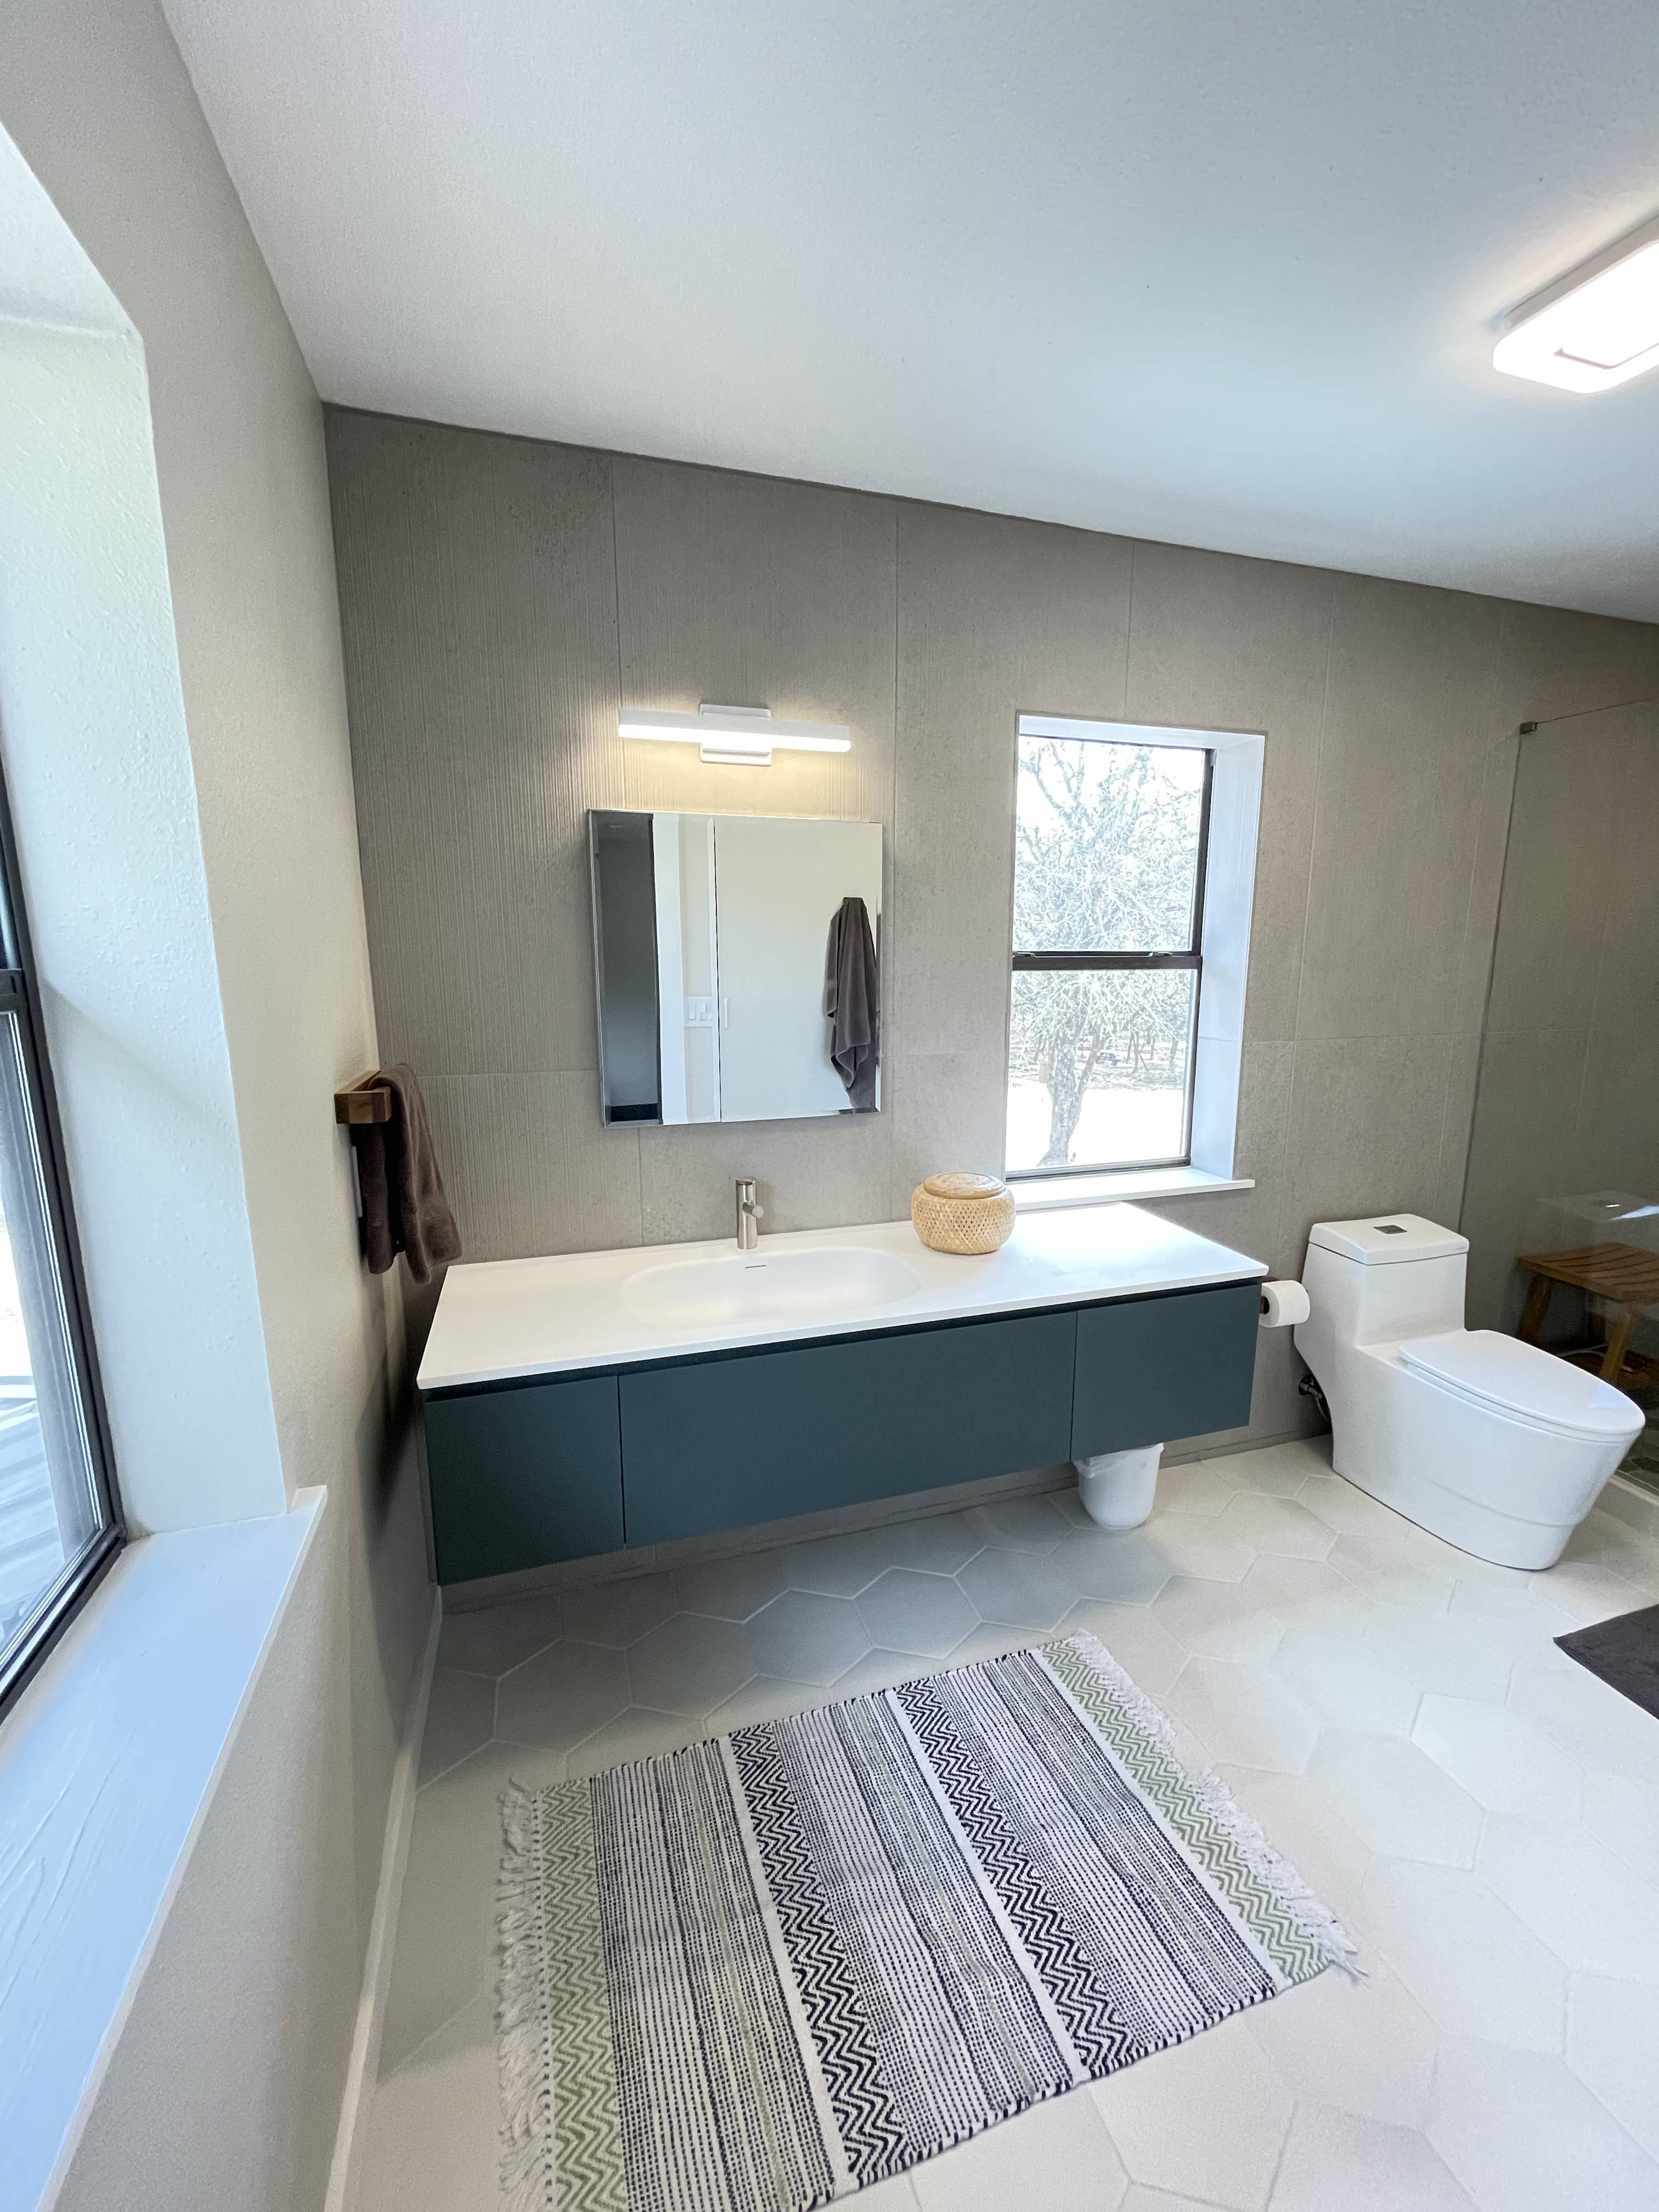 Best Full Bathroom Renovation In Central Texas, Serving San Marcos, Texas and Surrounding Cities